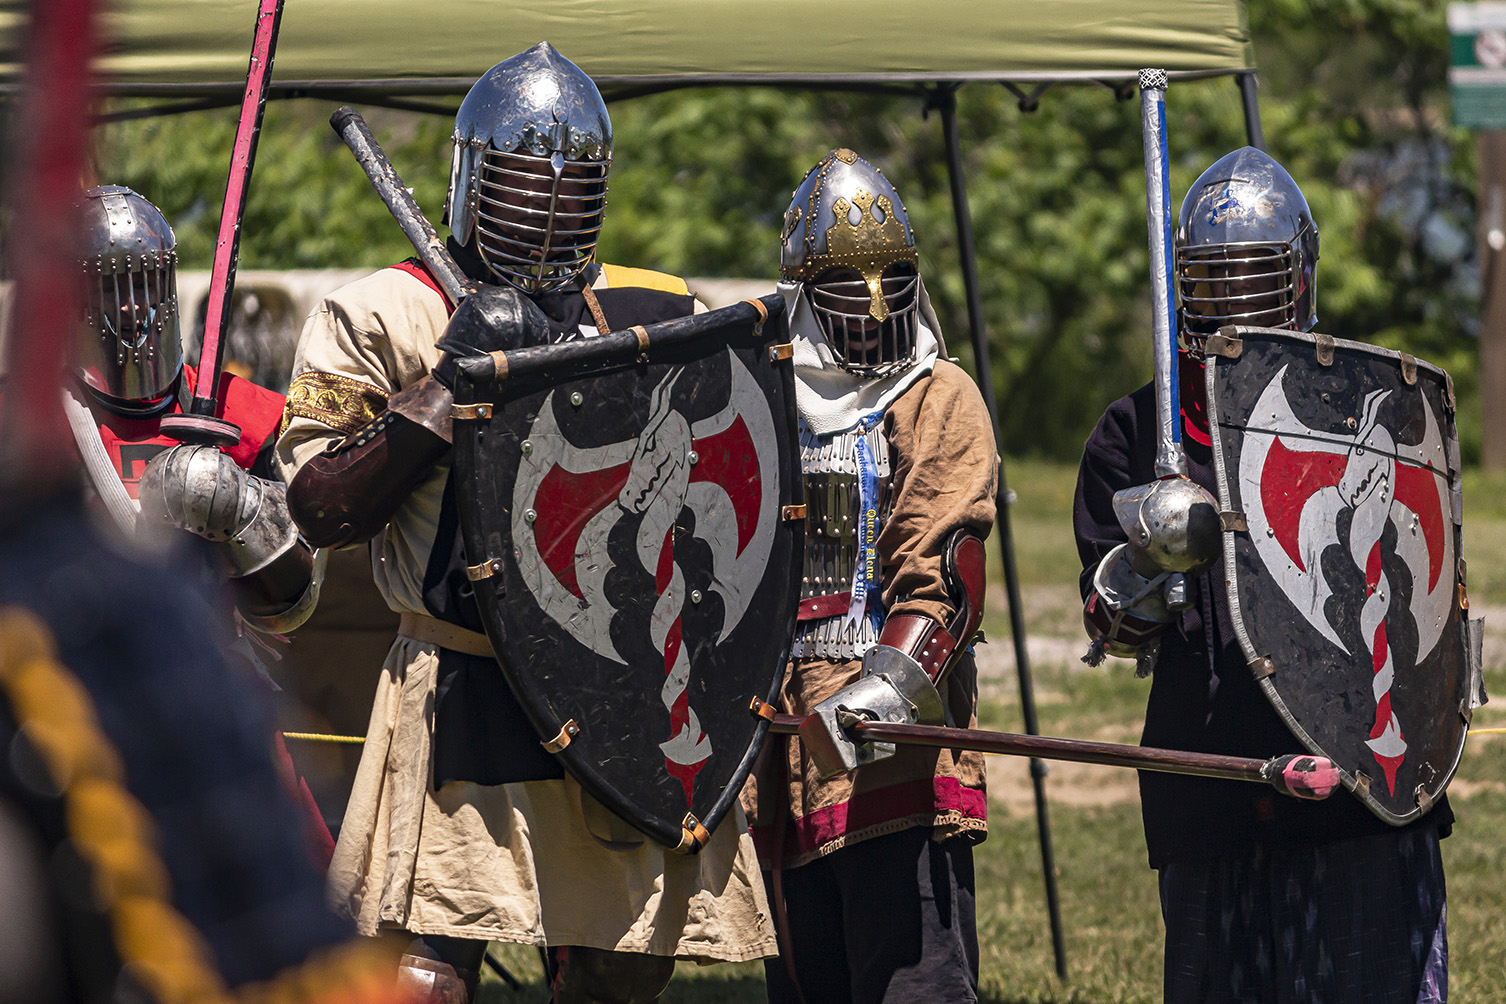 Rozakii fighters stand in a line, holding shields and spears